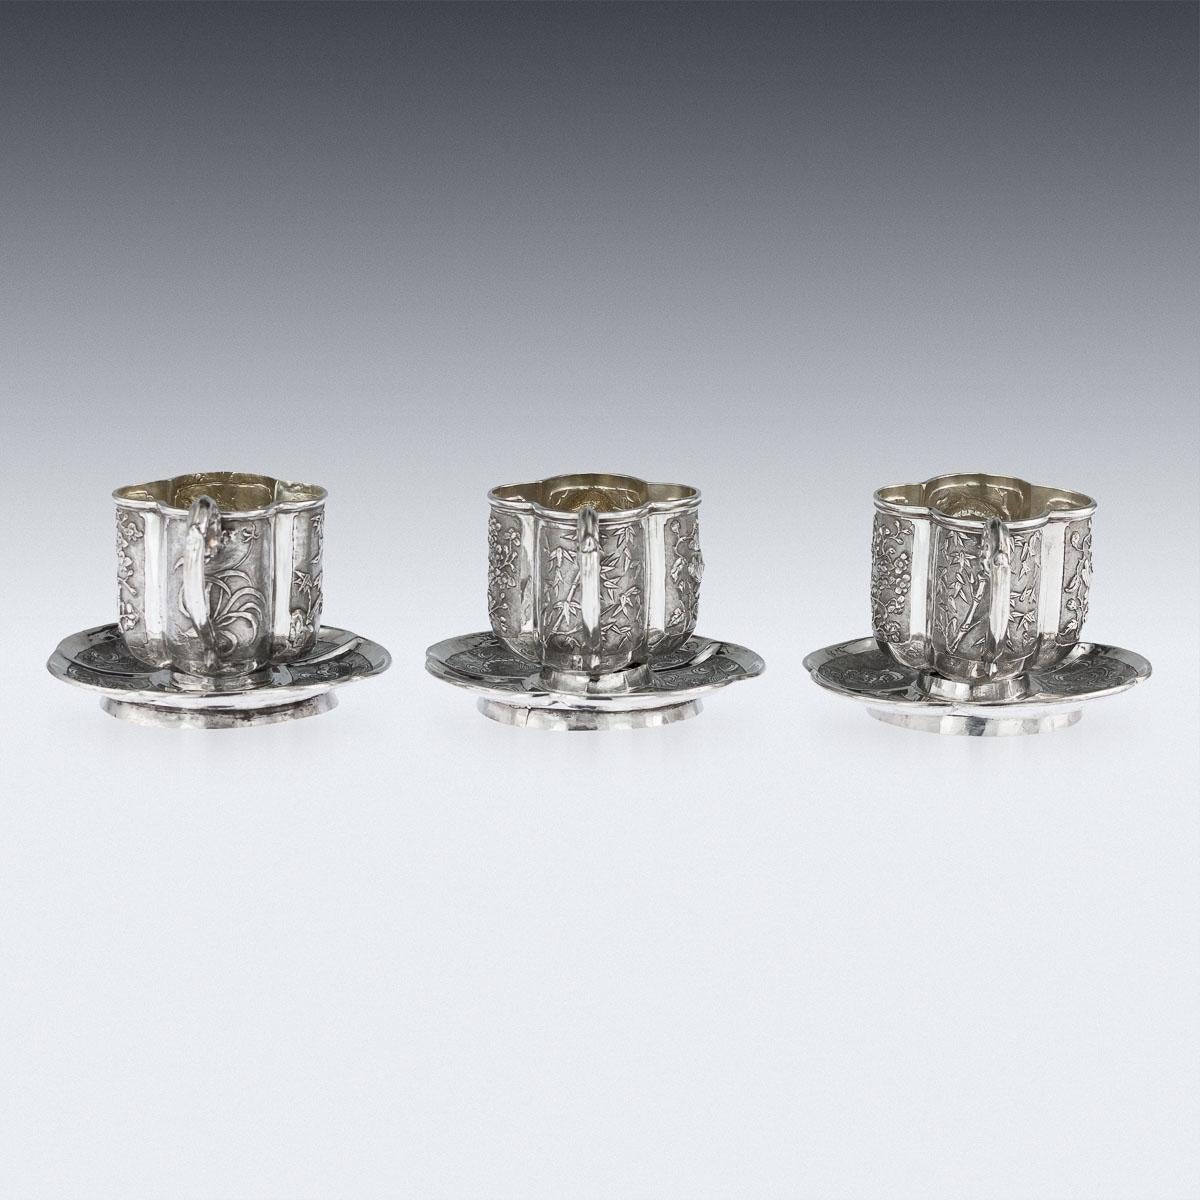 Chinese Export 19th Century Chinese Solid Silver Three Tea Cups & Saucers, Nam-Hing, circa 1890